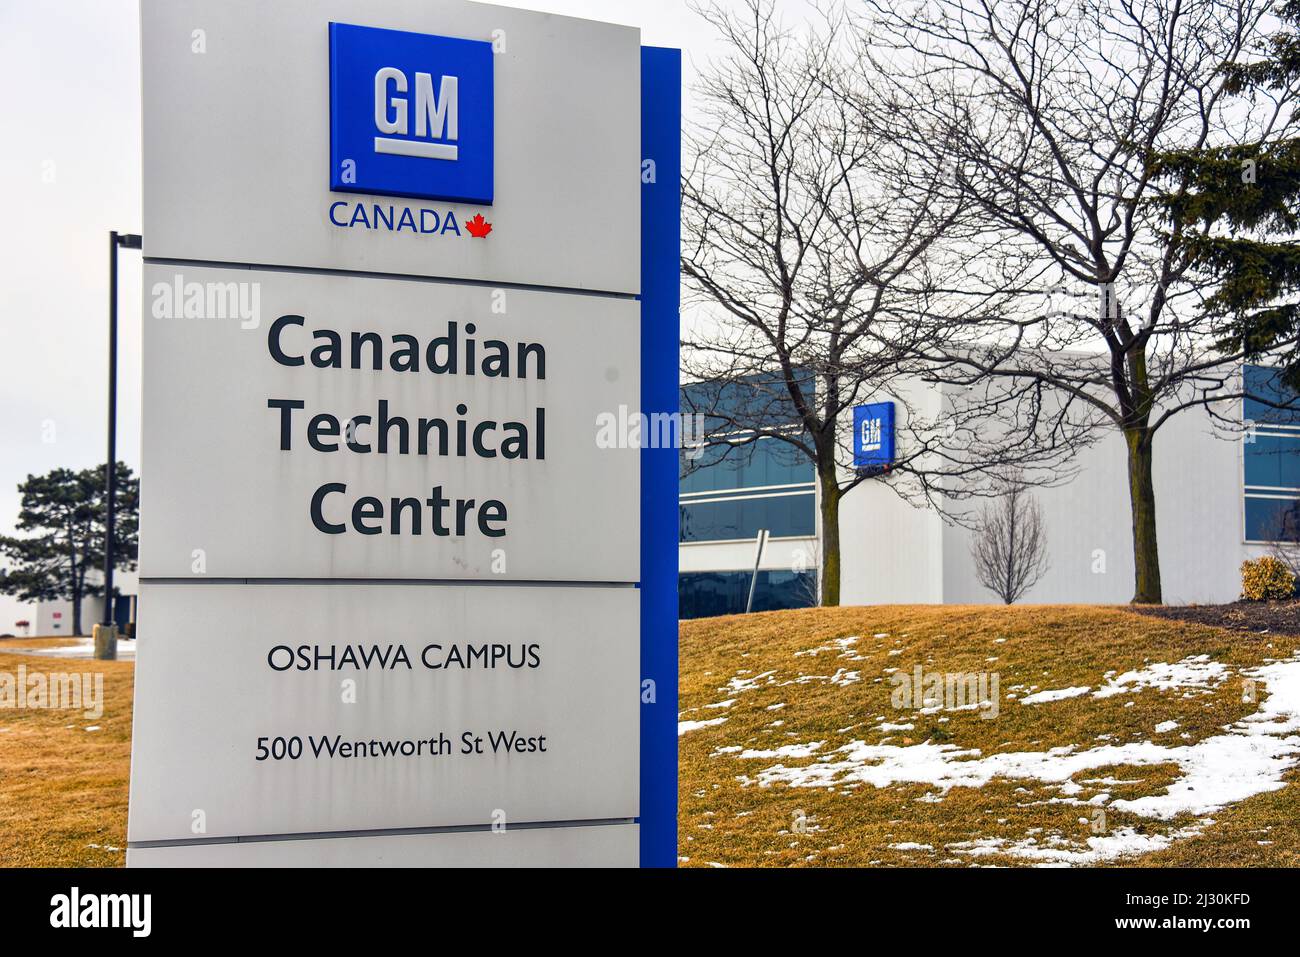 Oshawa, Canada - March 14, 2022: The GM Canada Canadian Technical Centre, Oshawa Campus on Wentworth Street. GM is ramping up auto production in Ontar Stock Photo